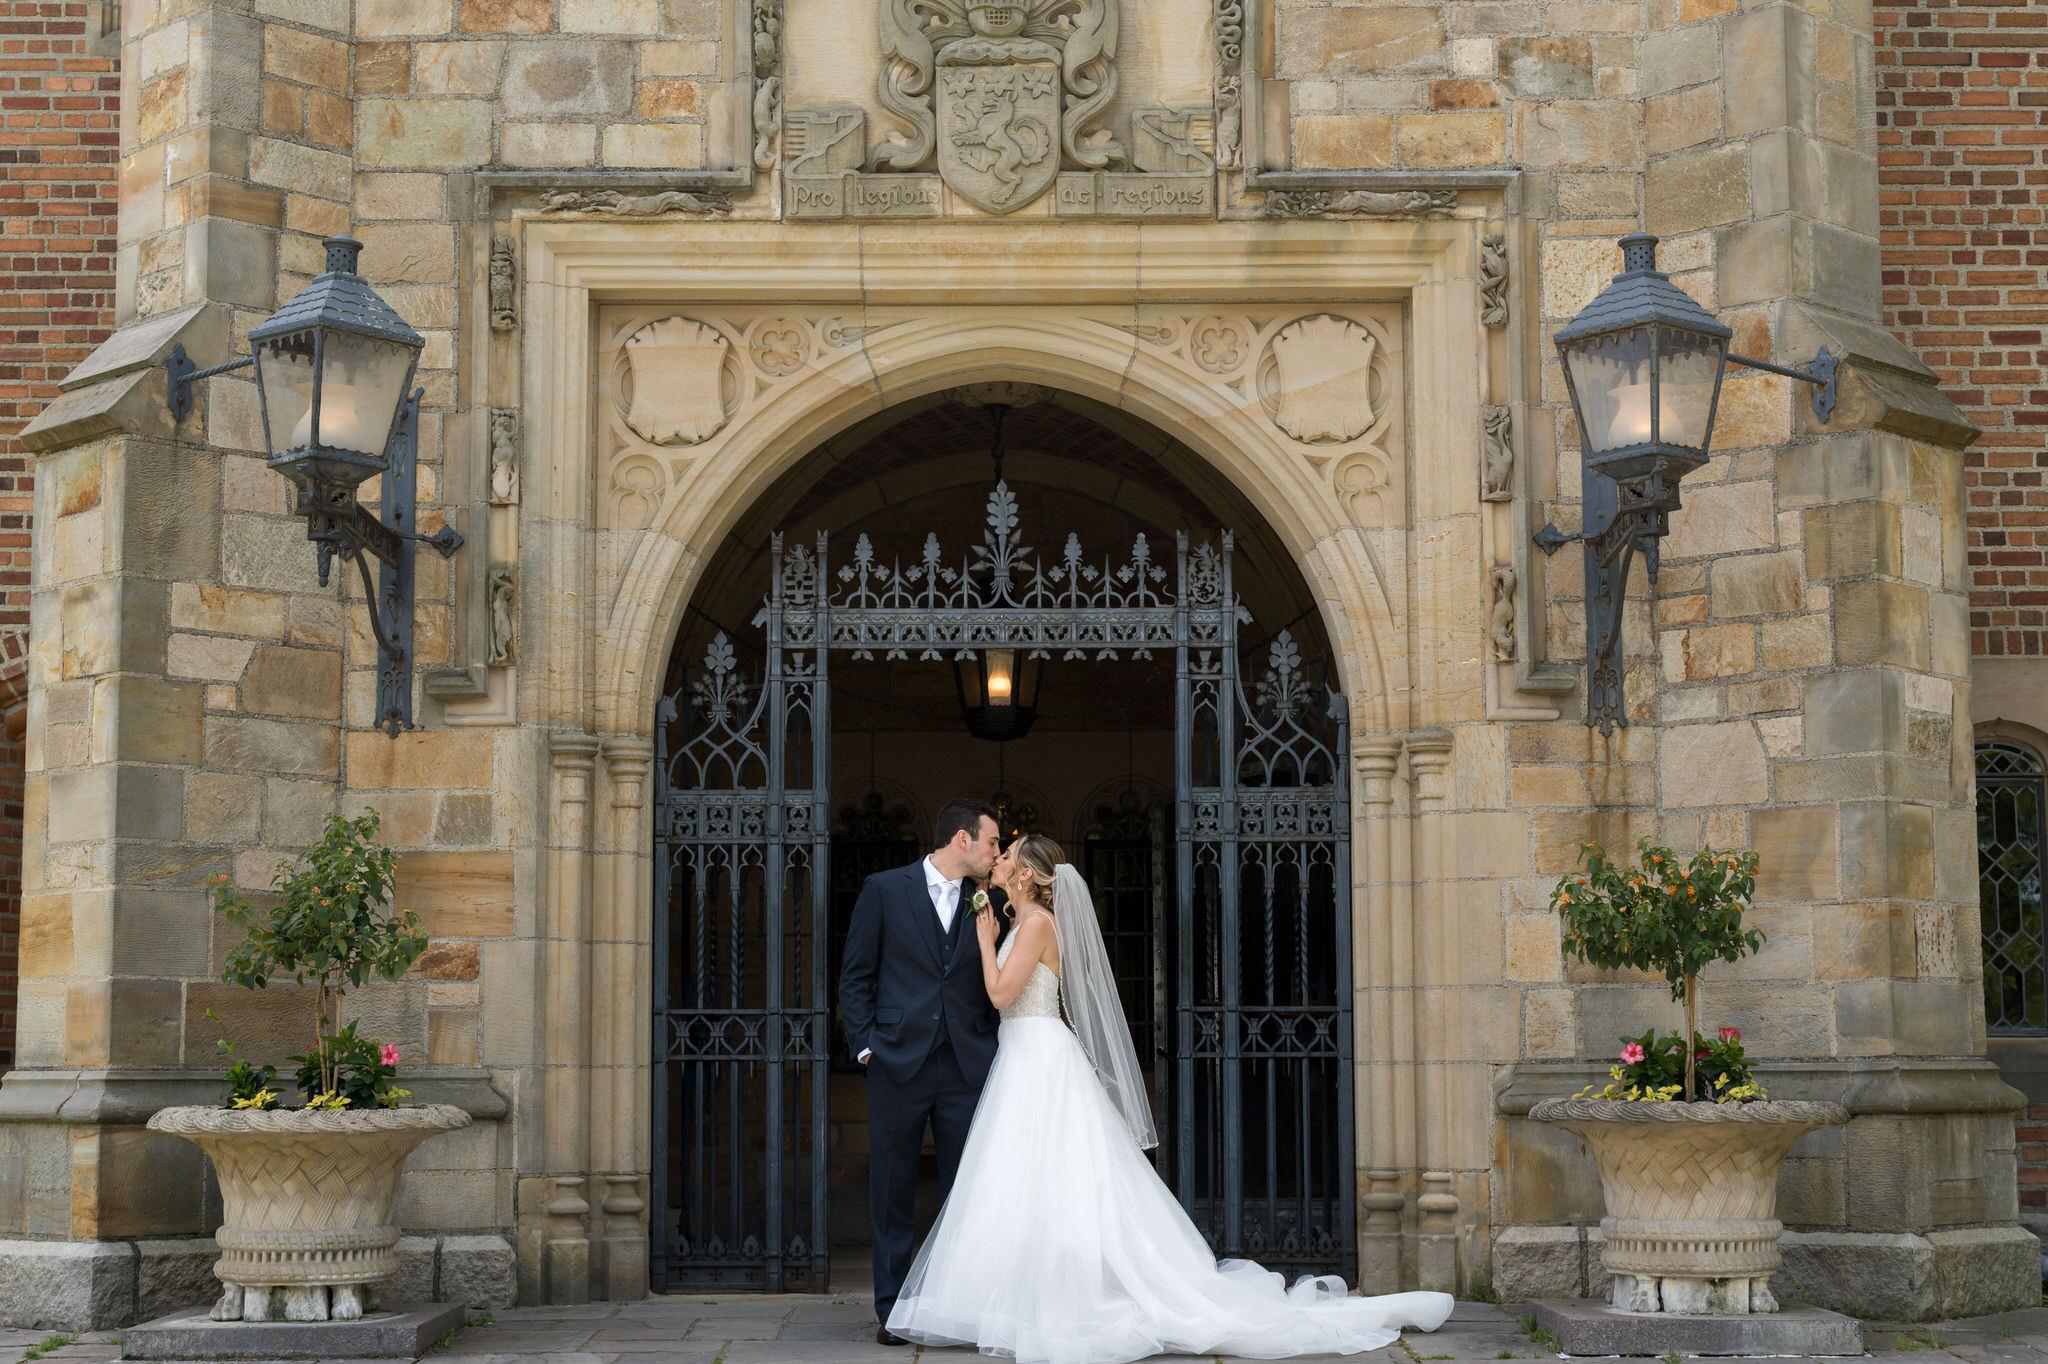 Holding onto his shoulder, a bride and groom pose in front of the main gate at their wedding at Meadowbrook Hall.  